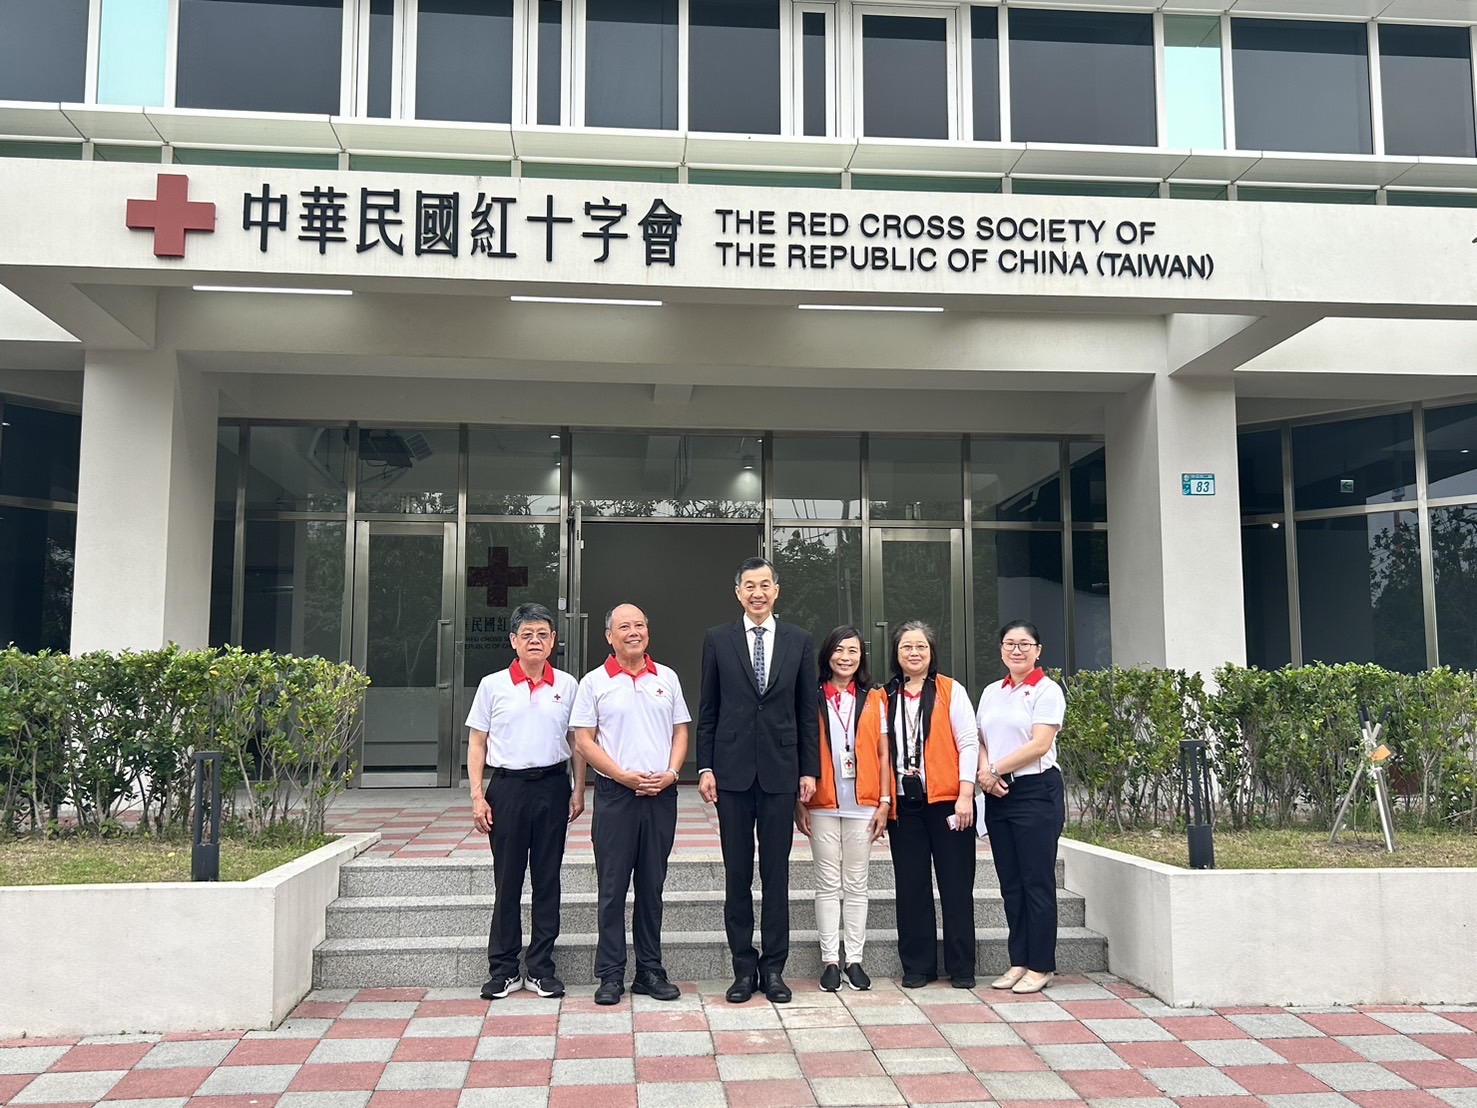 Welcome the visit of Executive Director Chen to the Red Cross